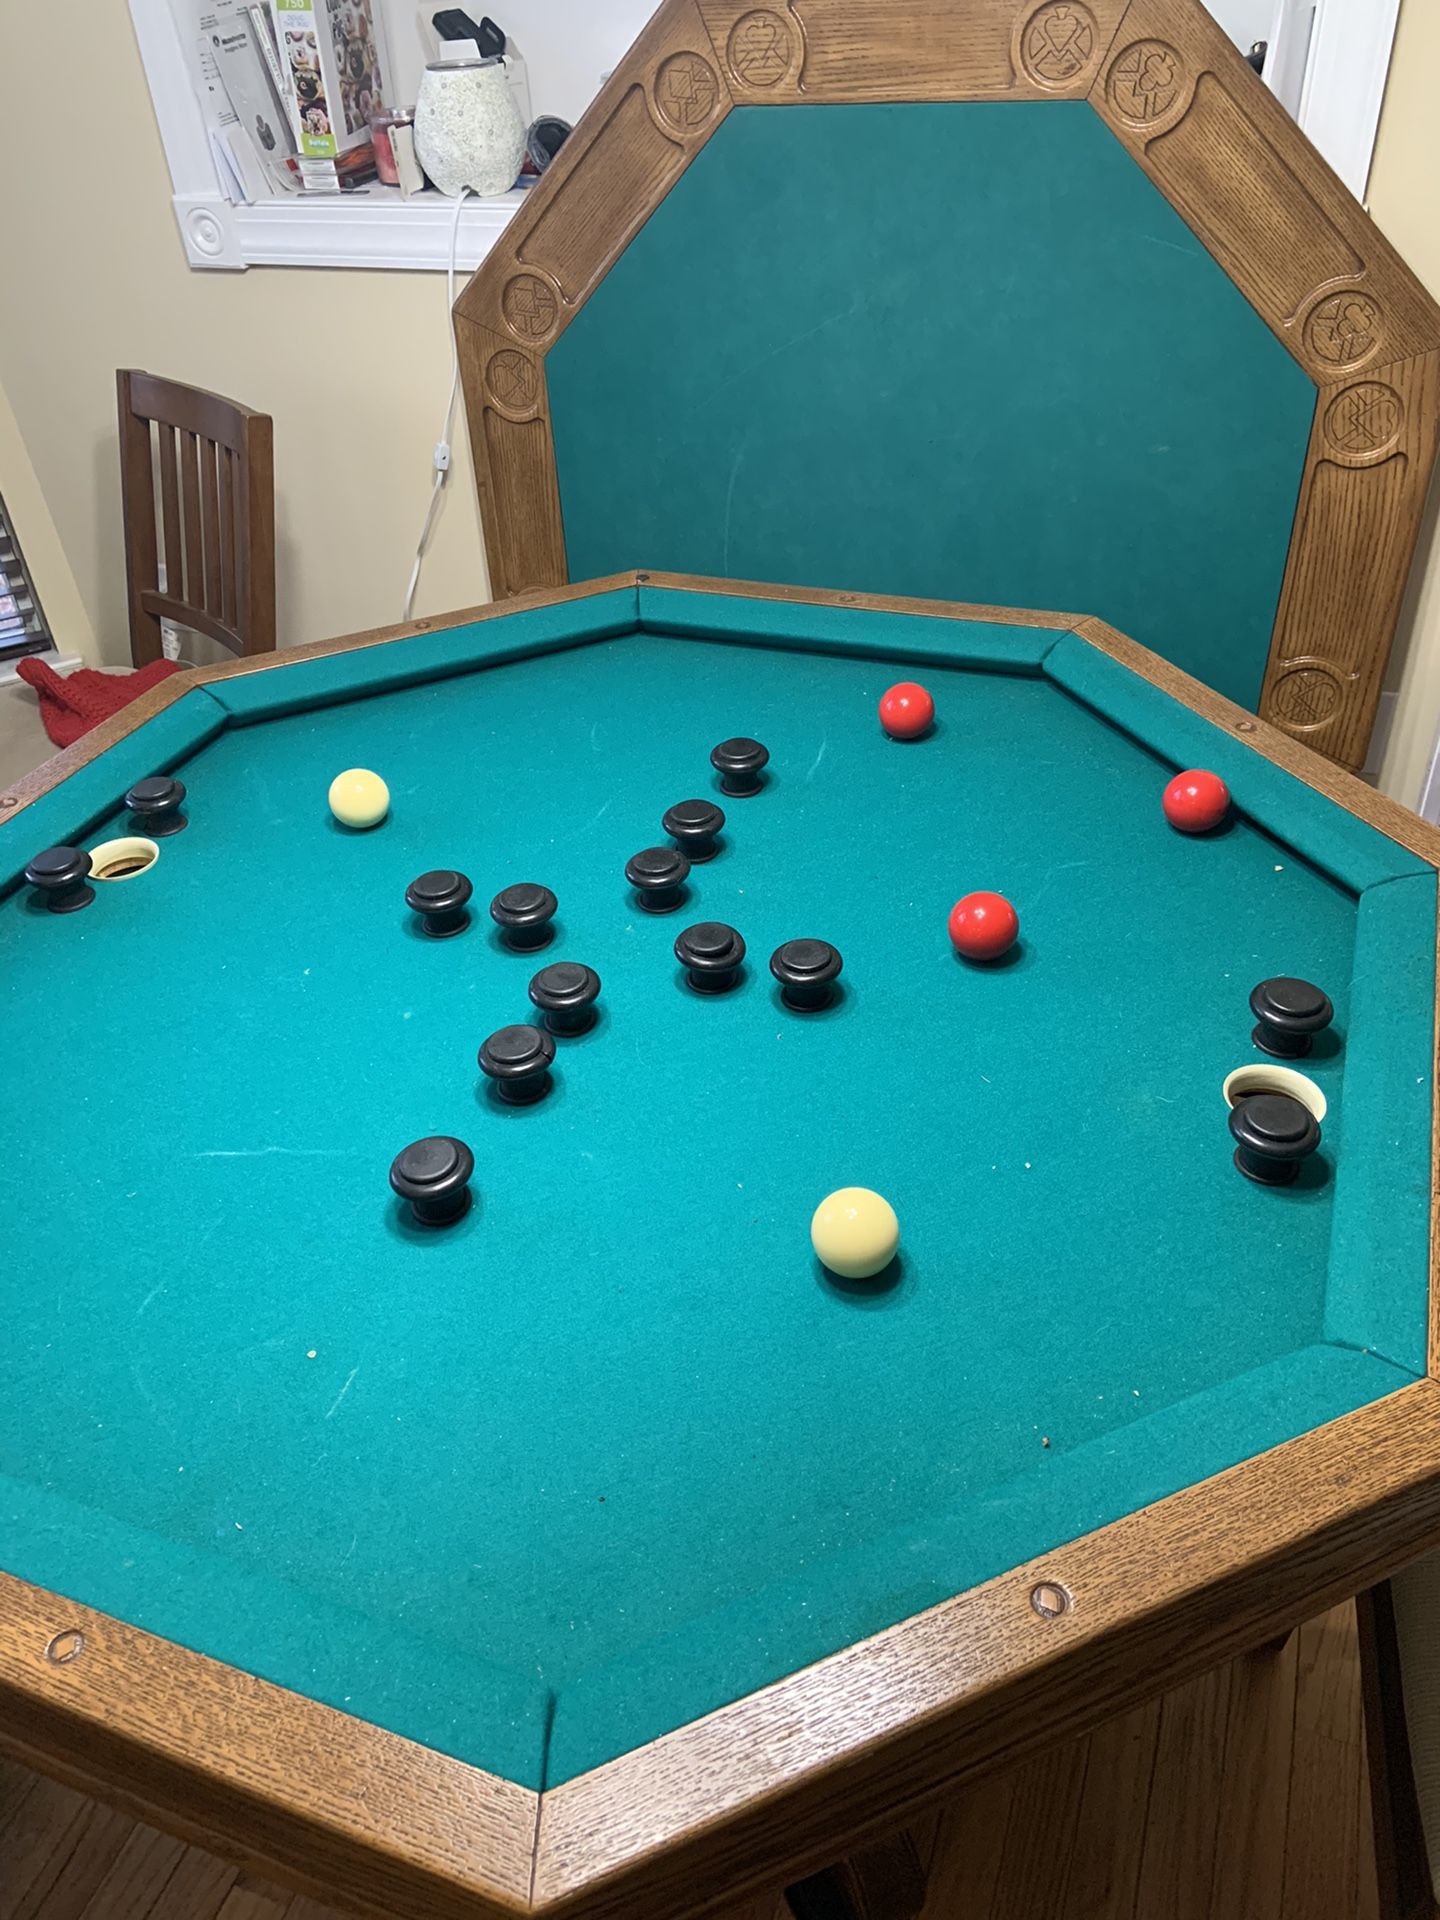 Solid Wood/Poker/Bumper Pool Table (All-in-on) - available Sunday 23rd